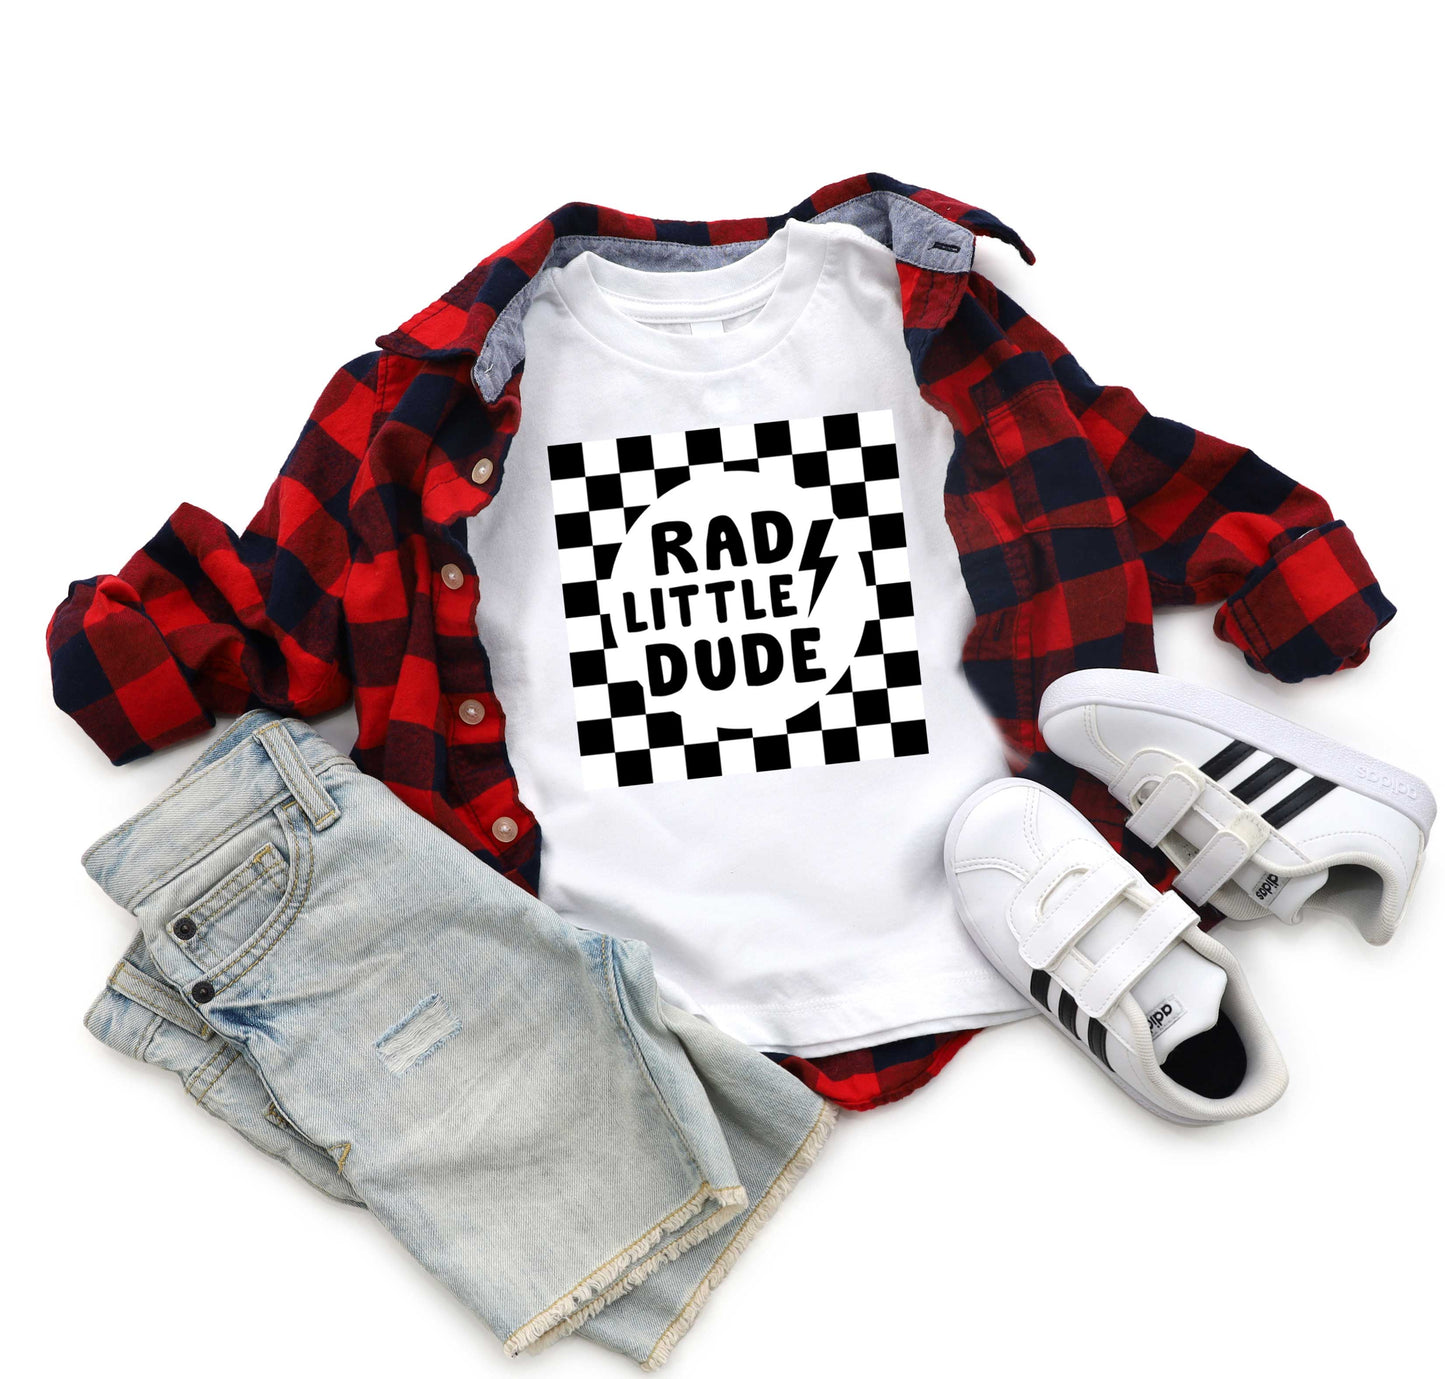 Rad Little Dude Checkered | Youth Graphic Short Sleeve Tee